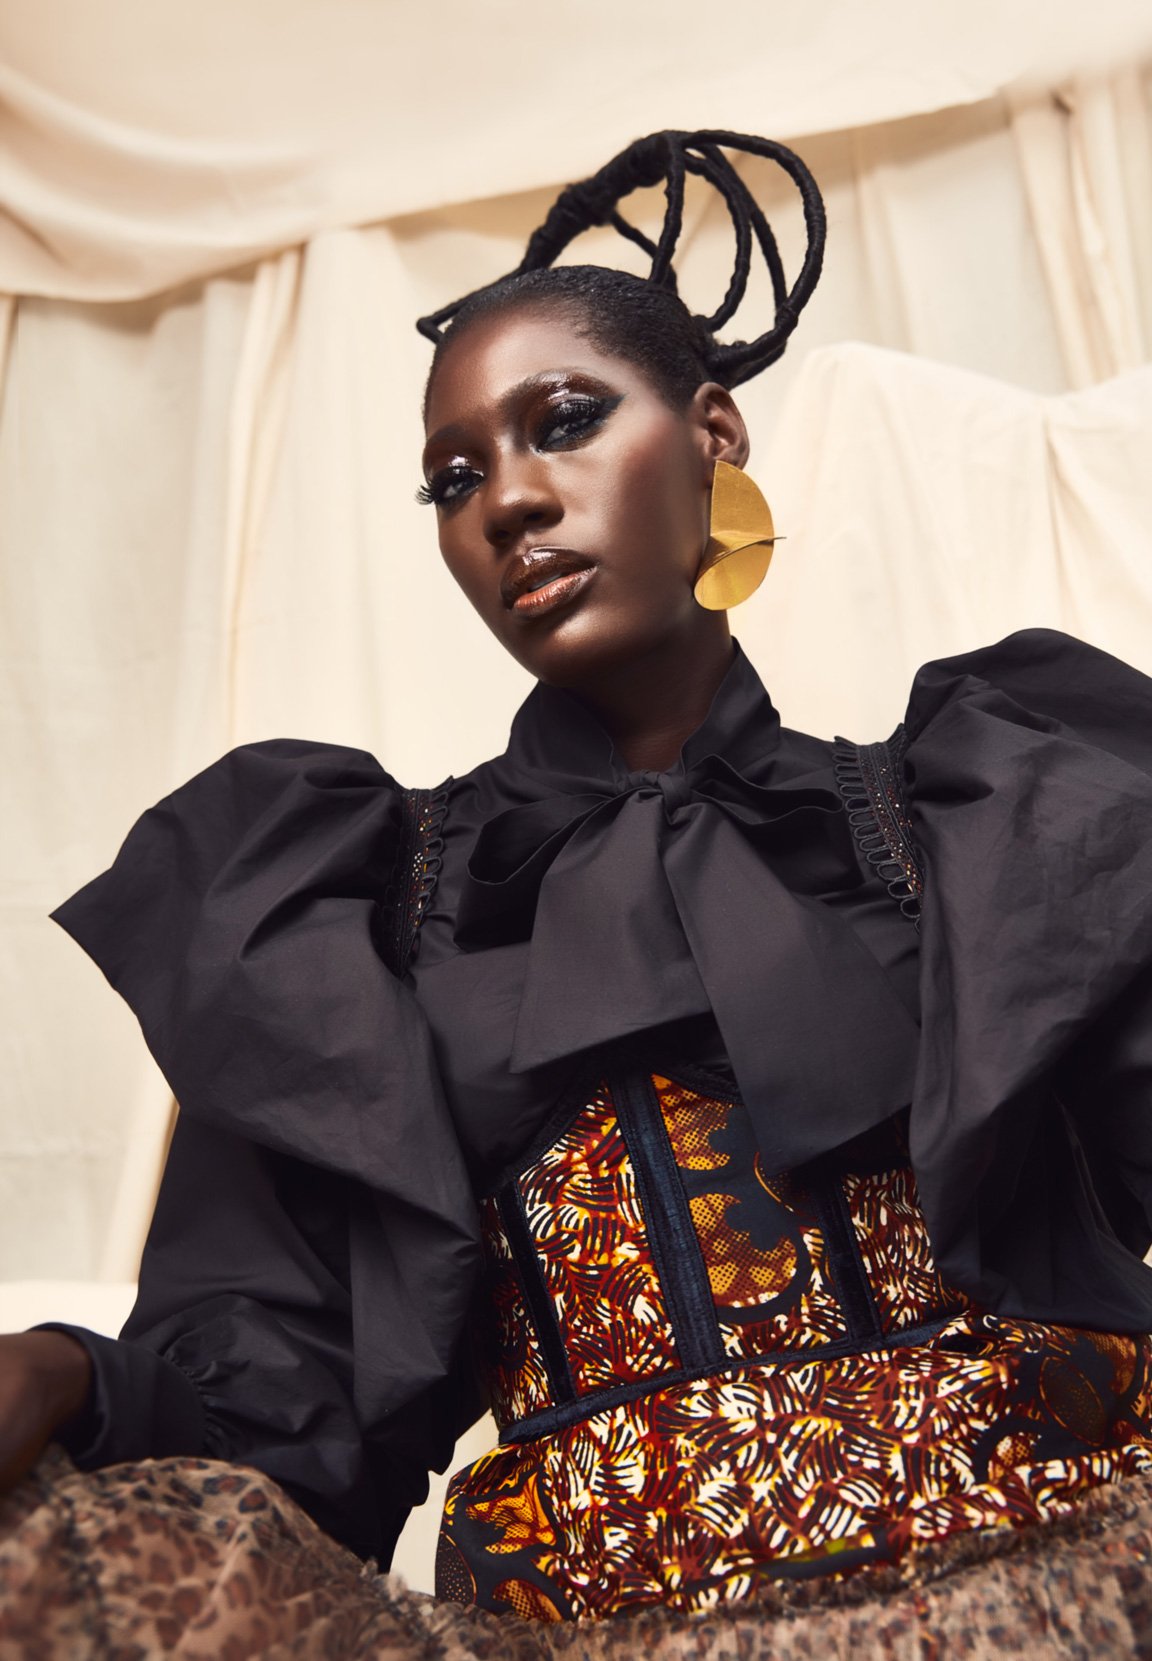 Celebrating Ghana’s independence: Meet Christie Brown, the Ghanian brand changing the ‘angry black women narrative’ [@ChristieBrowngh]